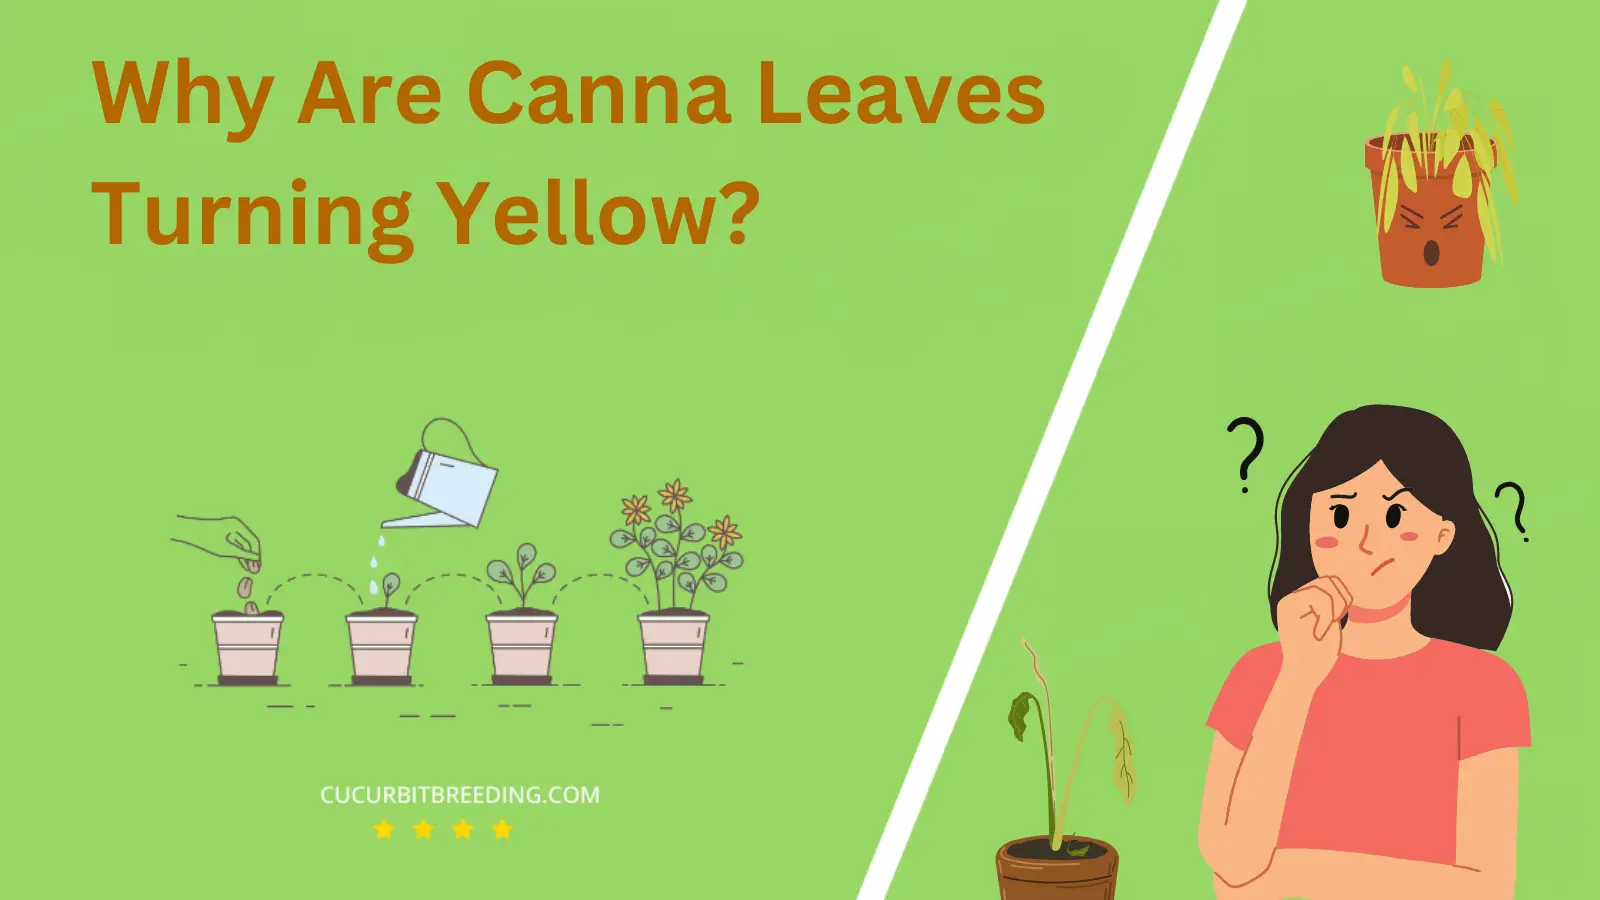 Why Are Canna Leaves Turning Yellow